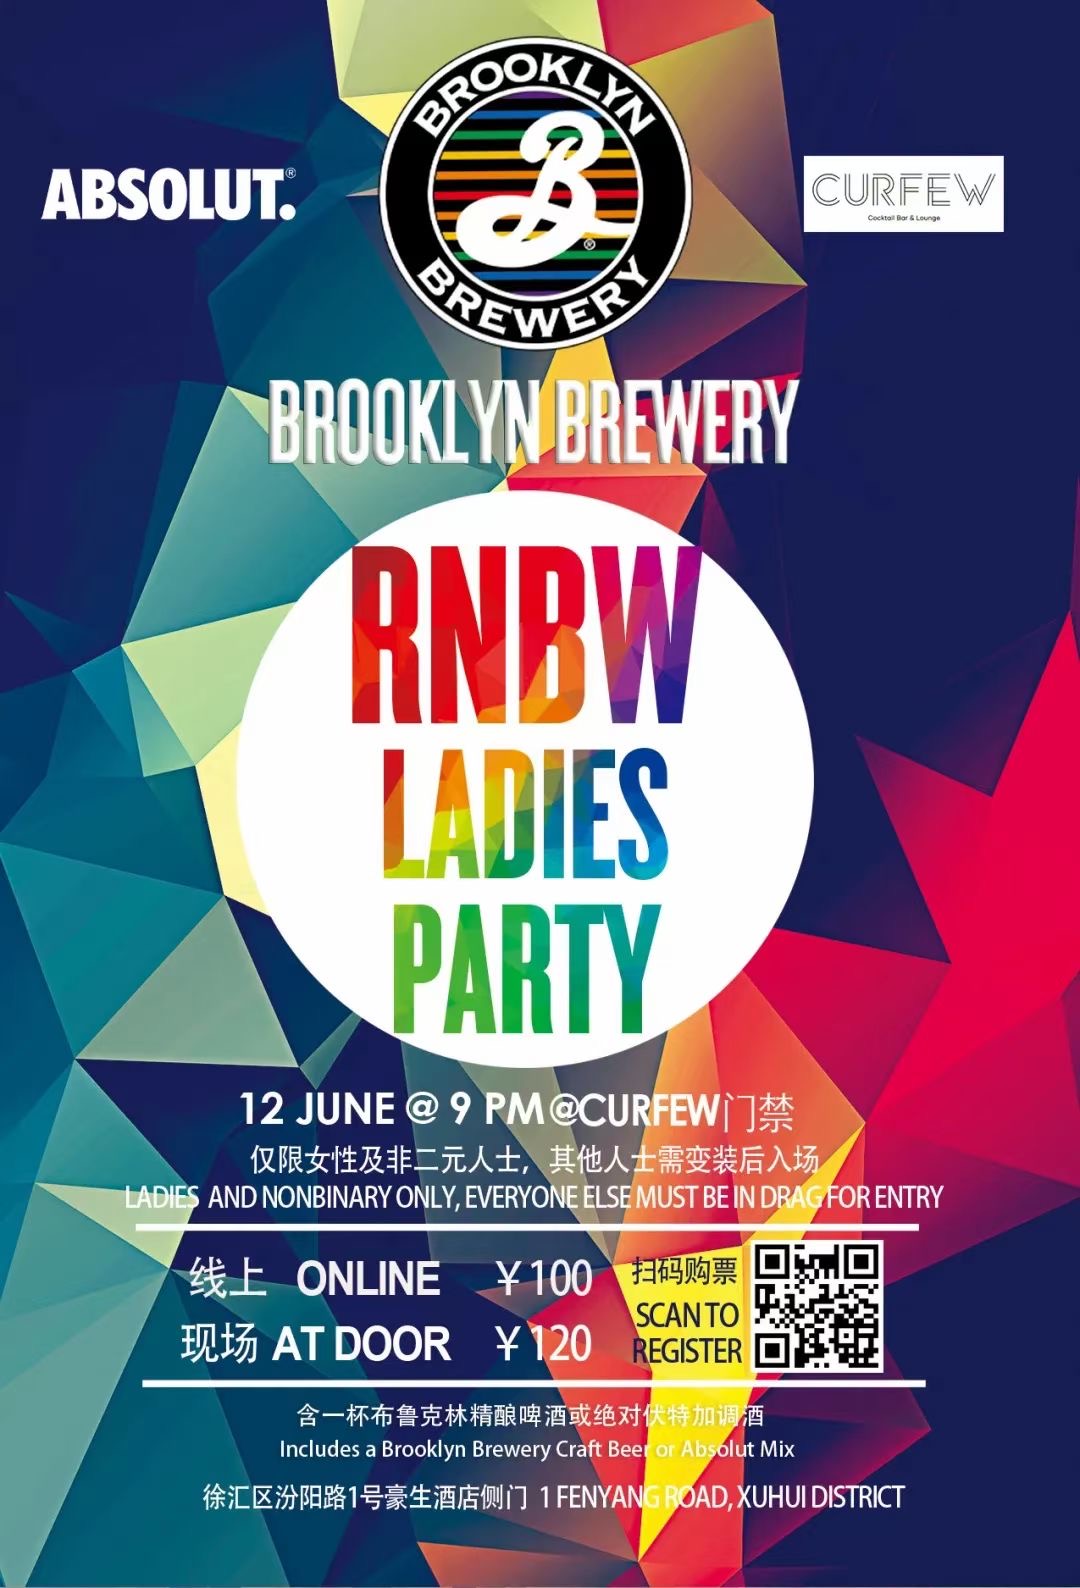 Brooklyn Brewery RNBW Ladies Party | Shanghai Events